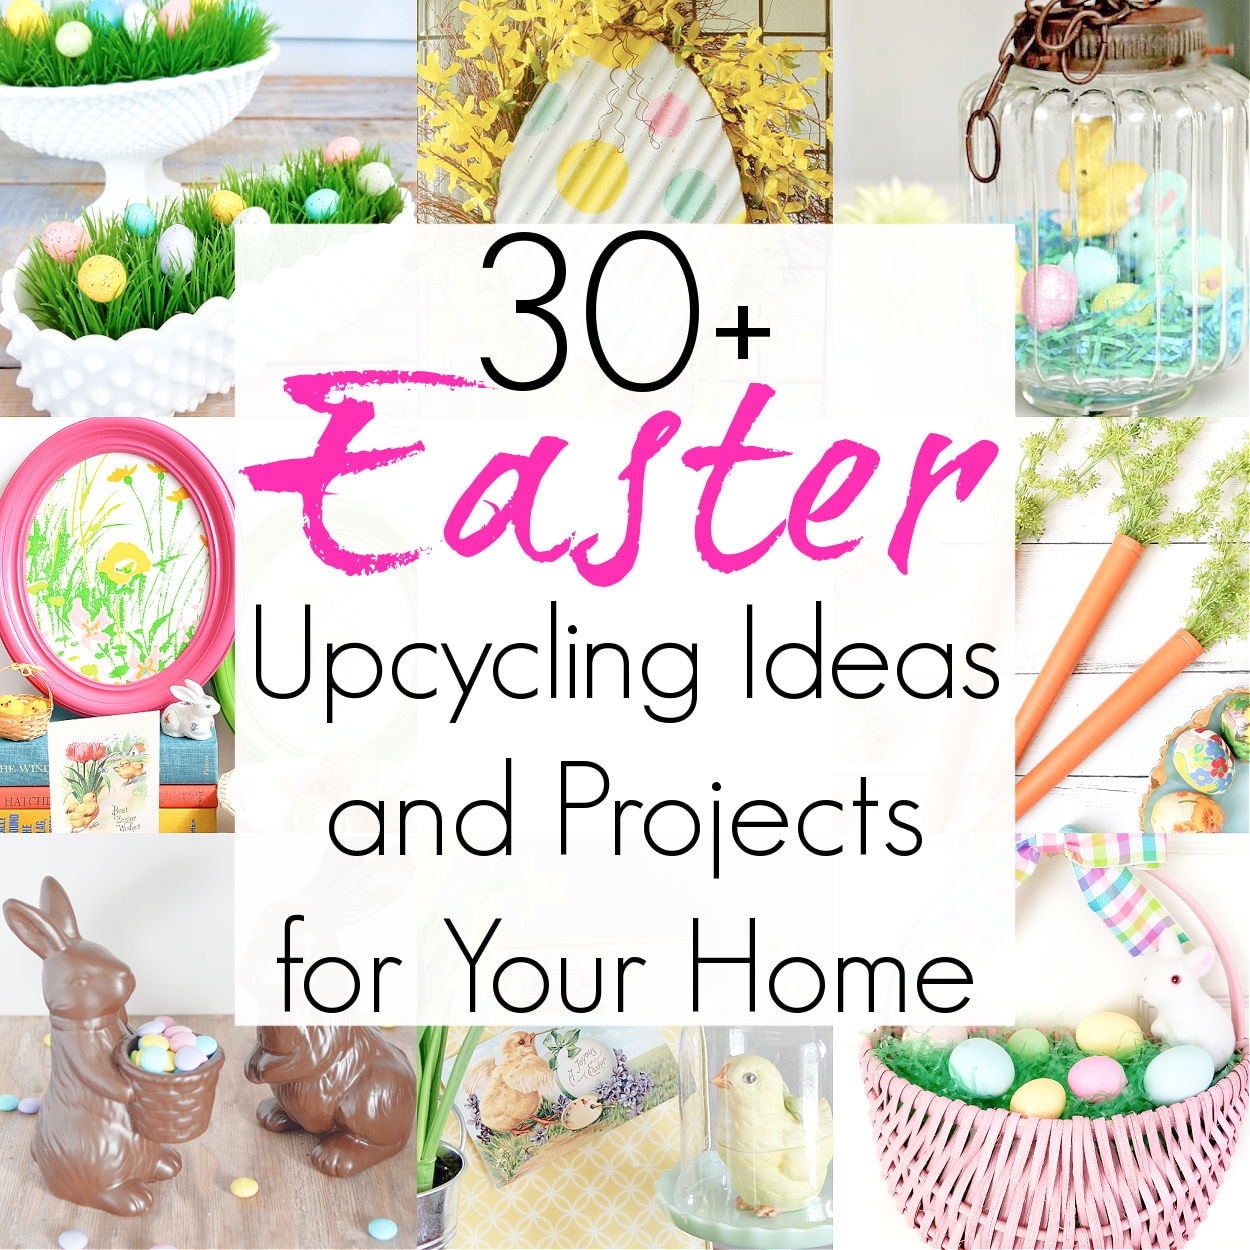 30+ Upcycling Ideas with an Easter Aesthetic